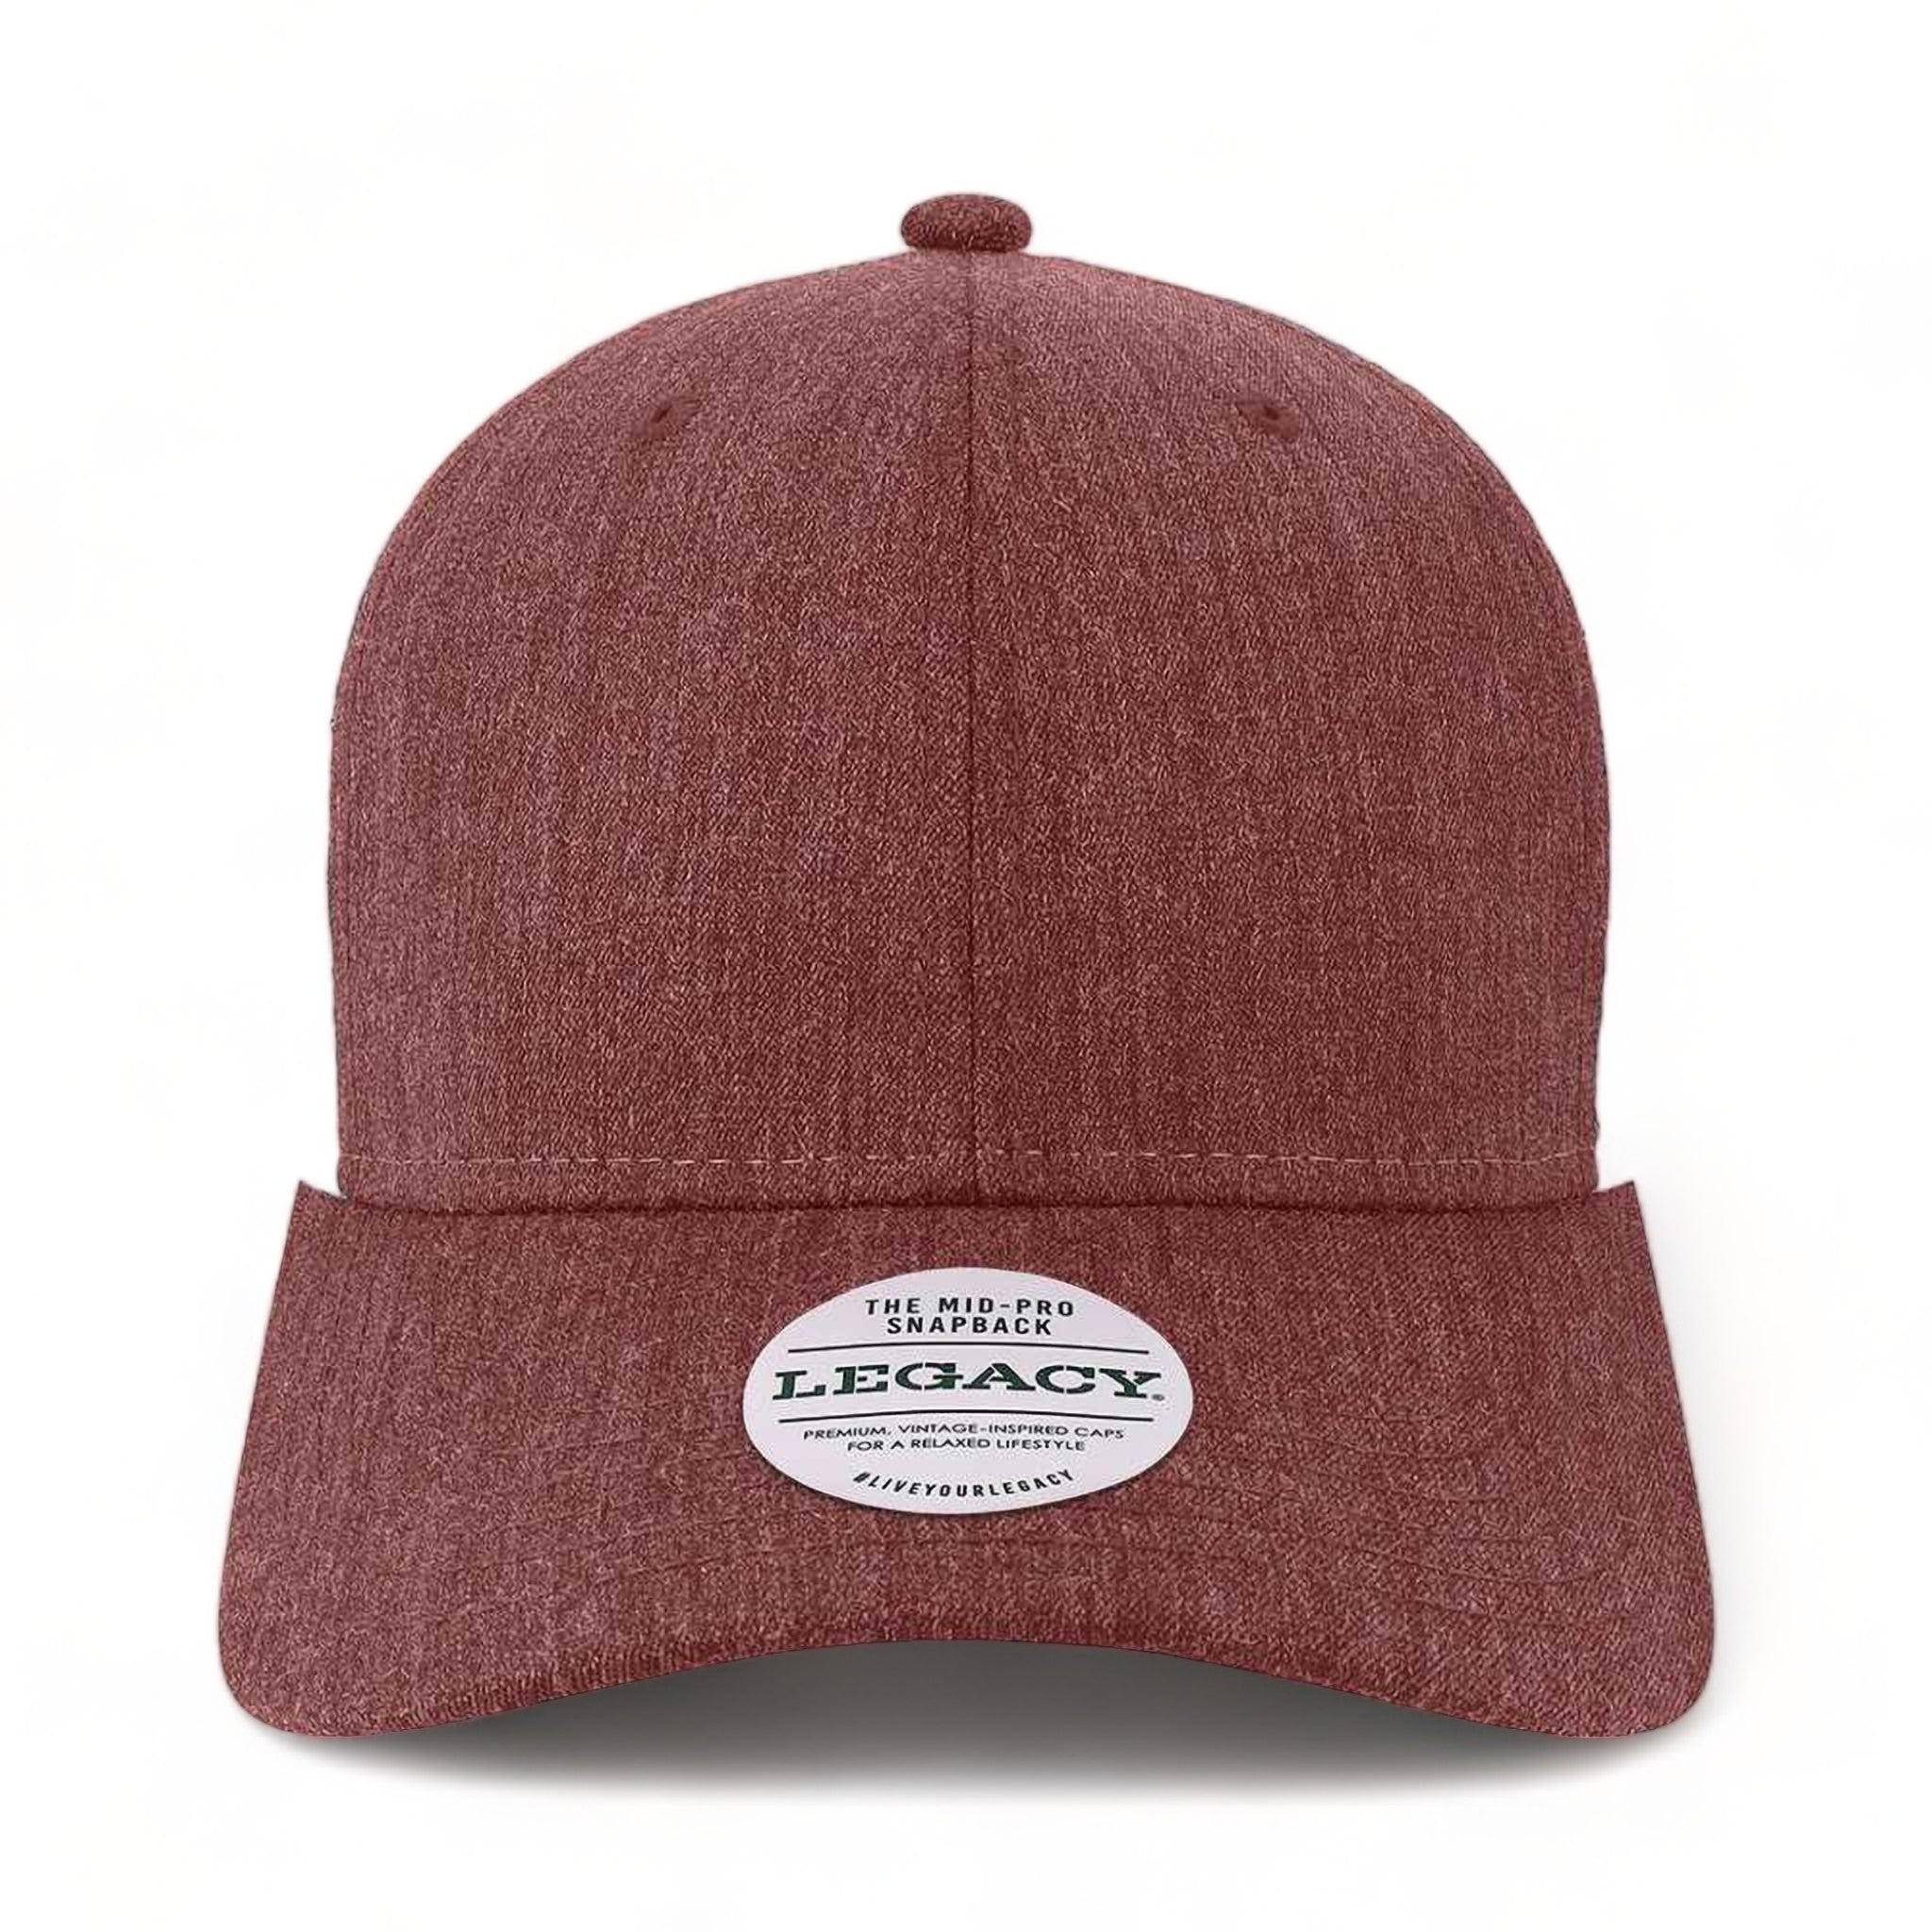 Front view of LEGACY MPS custom hat in mélange burgundy and white